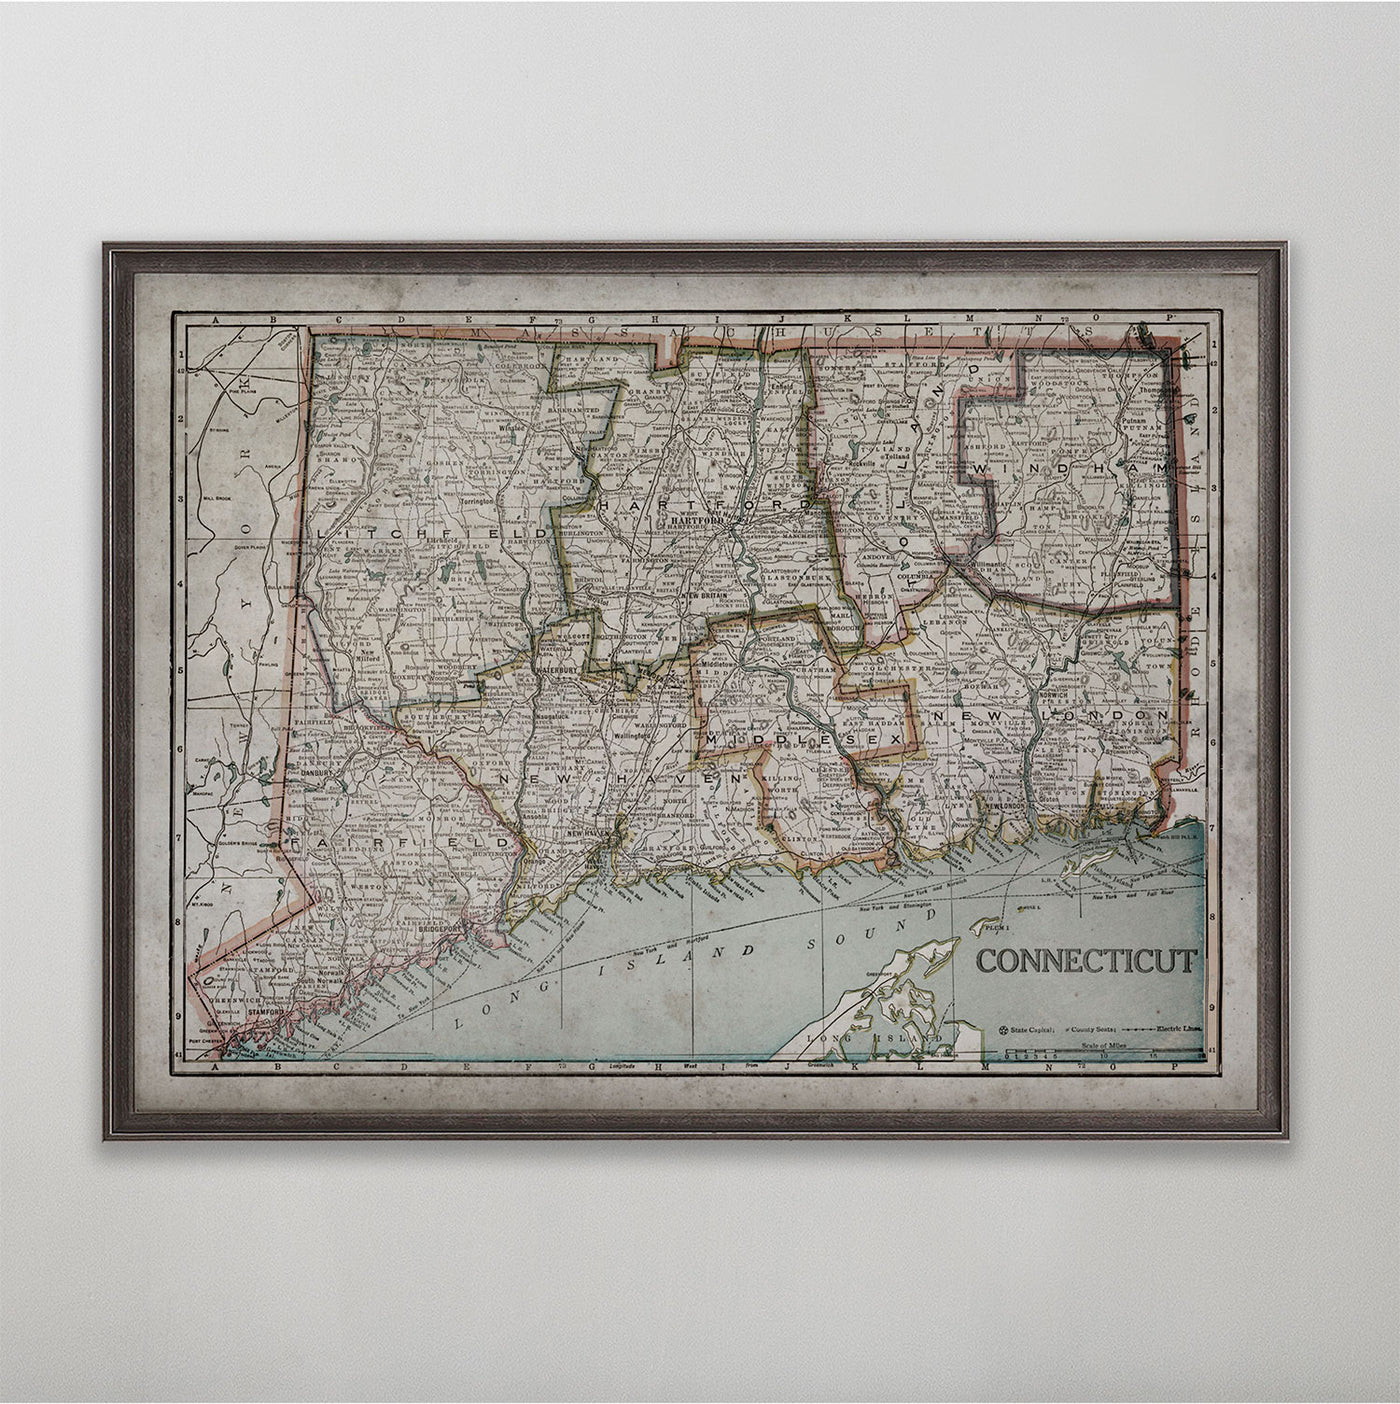 Old vintage historic map of Connecticut for wall art home decor. 